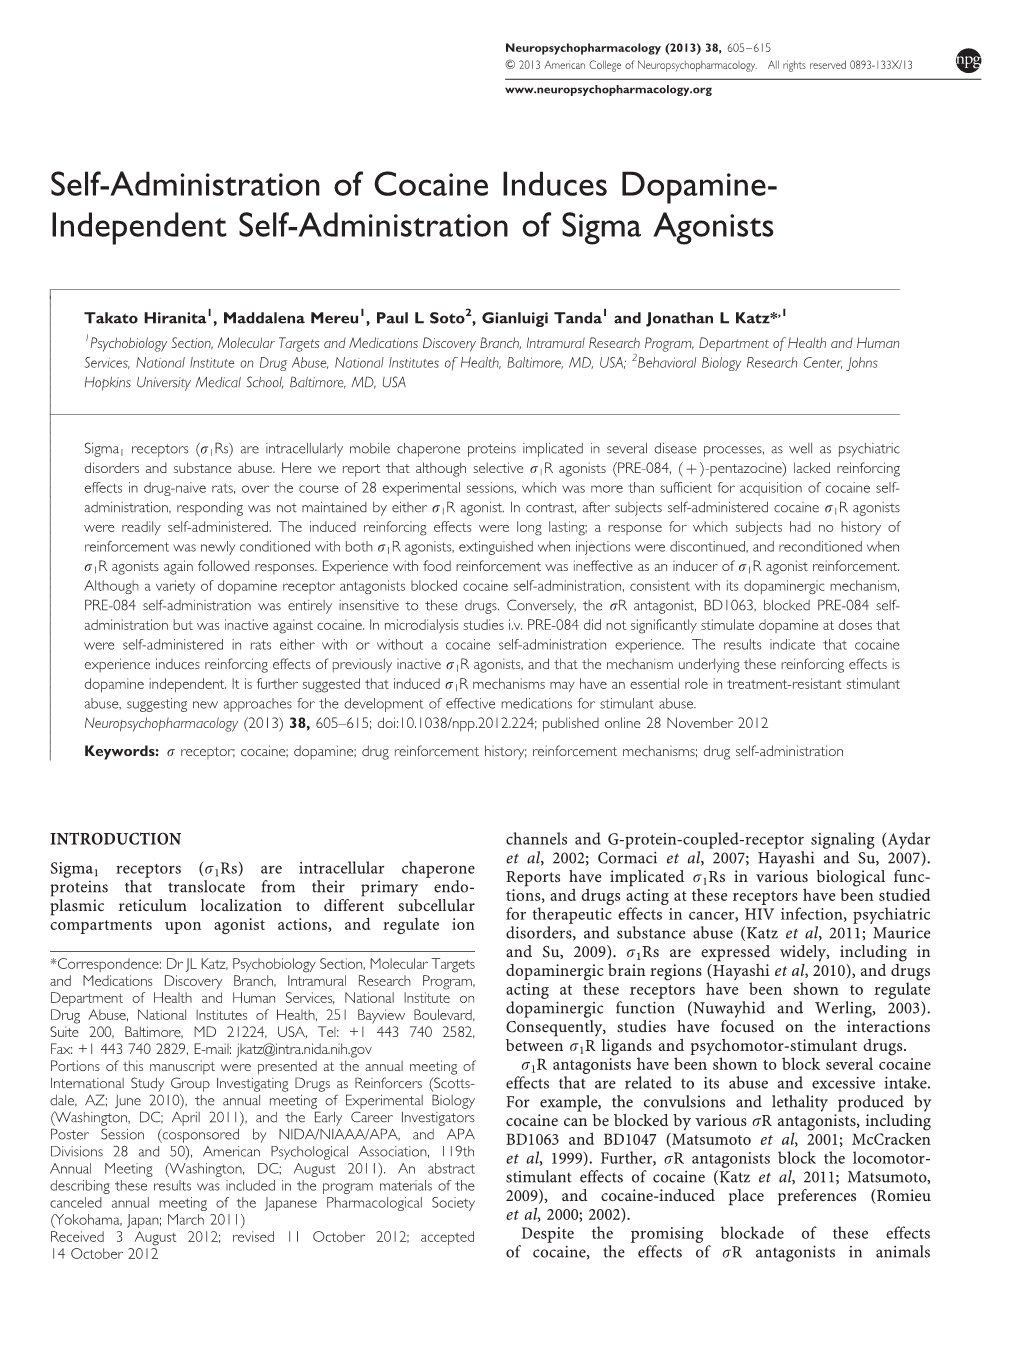 Self-Administration of Cocaine Induces Dopamine- Independent Self-Administration of Sigma Agonists